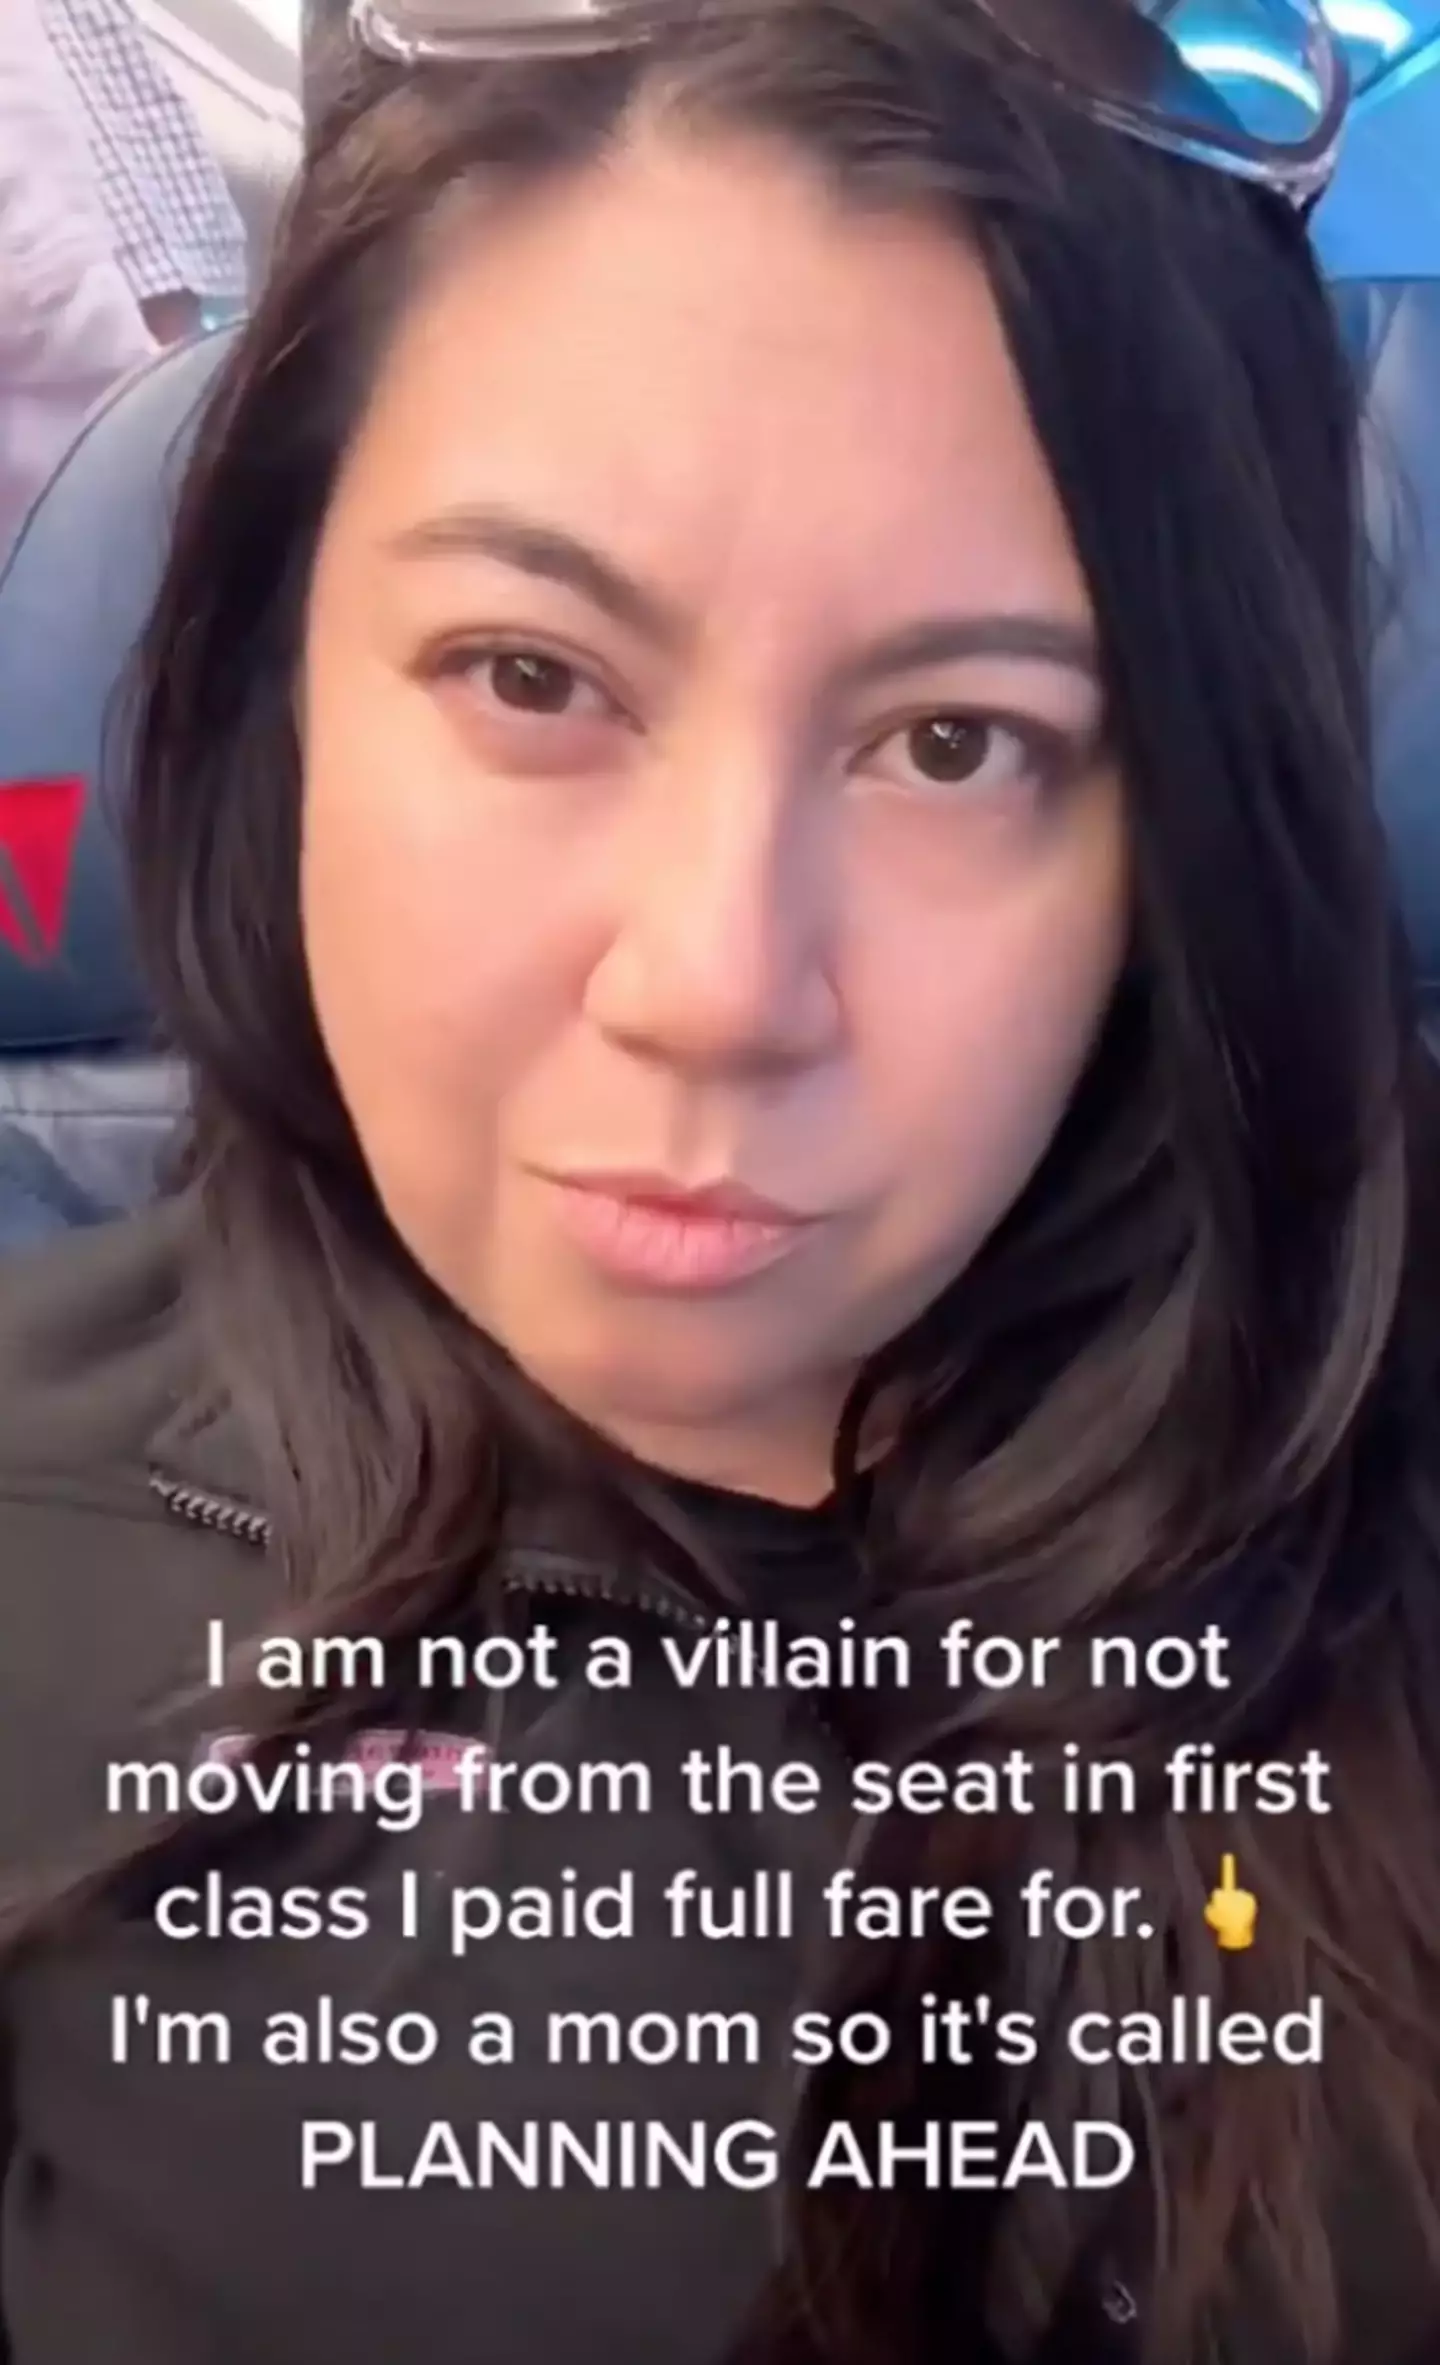 A woman has defended herself after refusing to move for a family on a plane (TikTok/@maresasd)